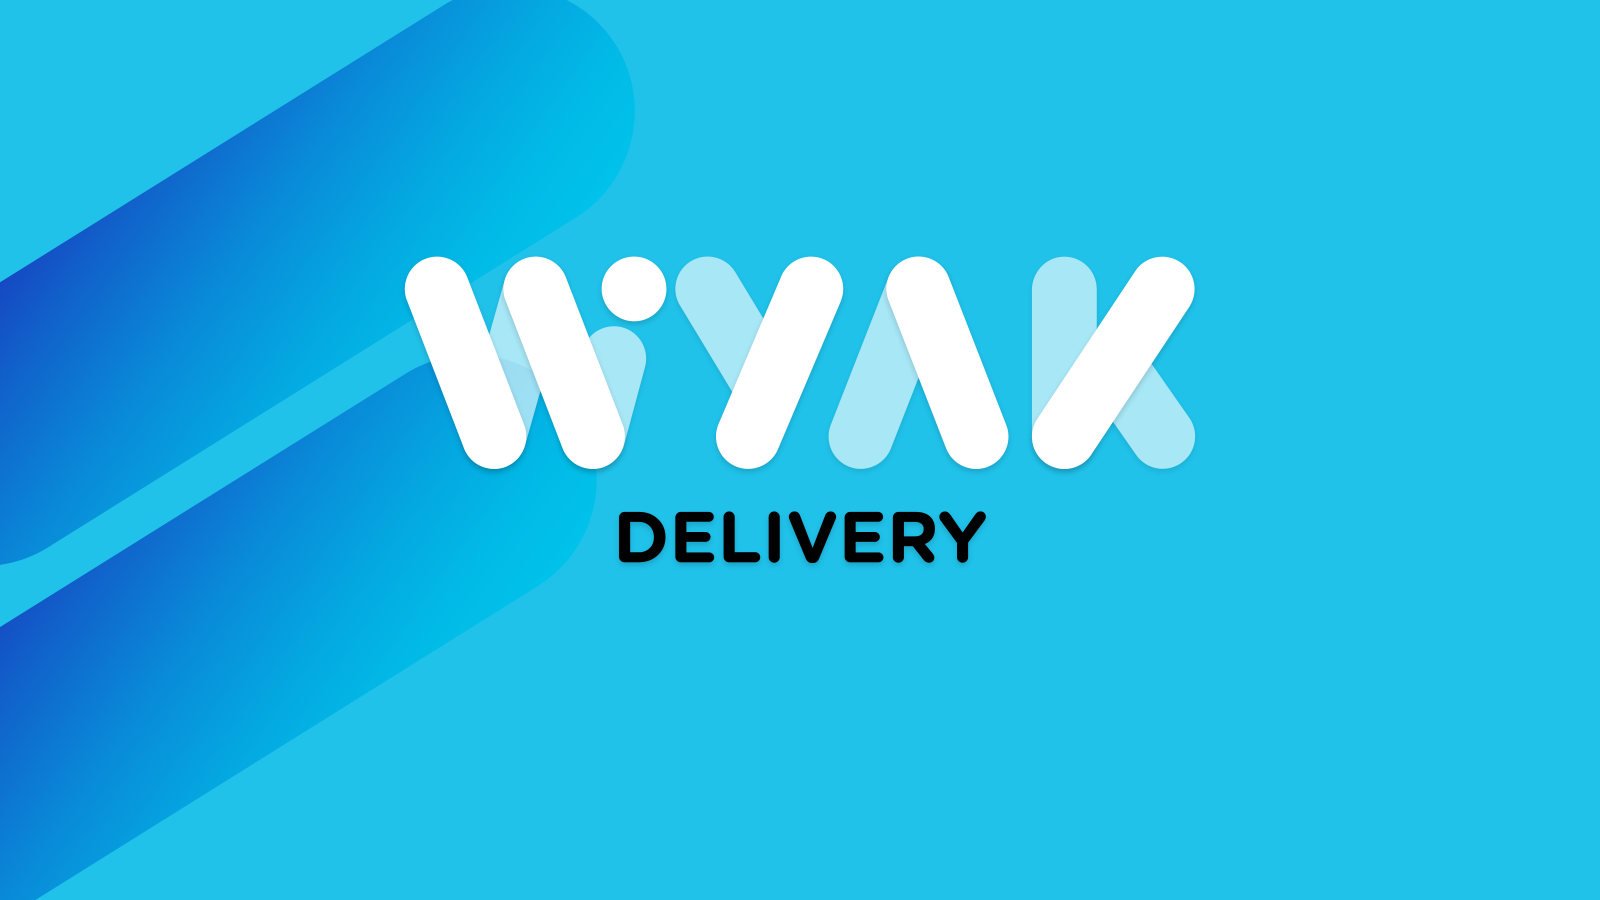 WIYAK DELIVERY CONSUMABLE